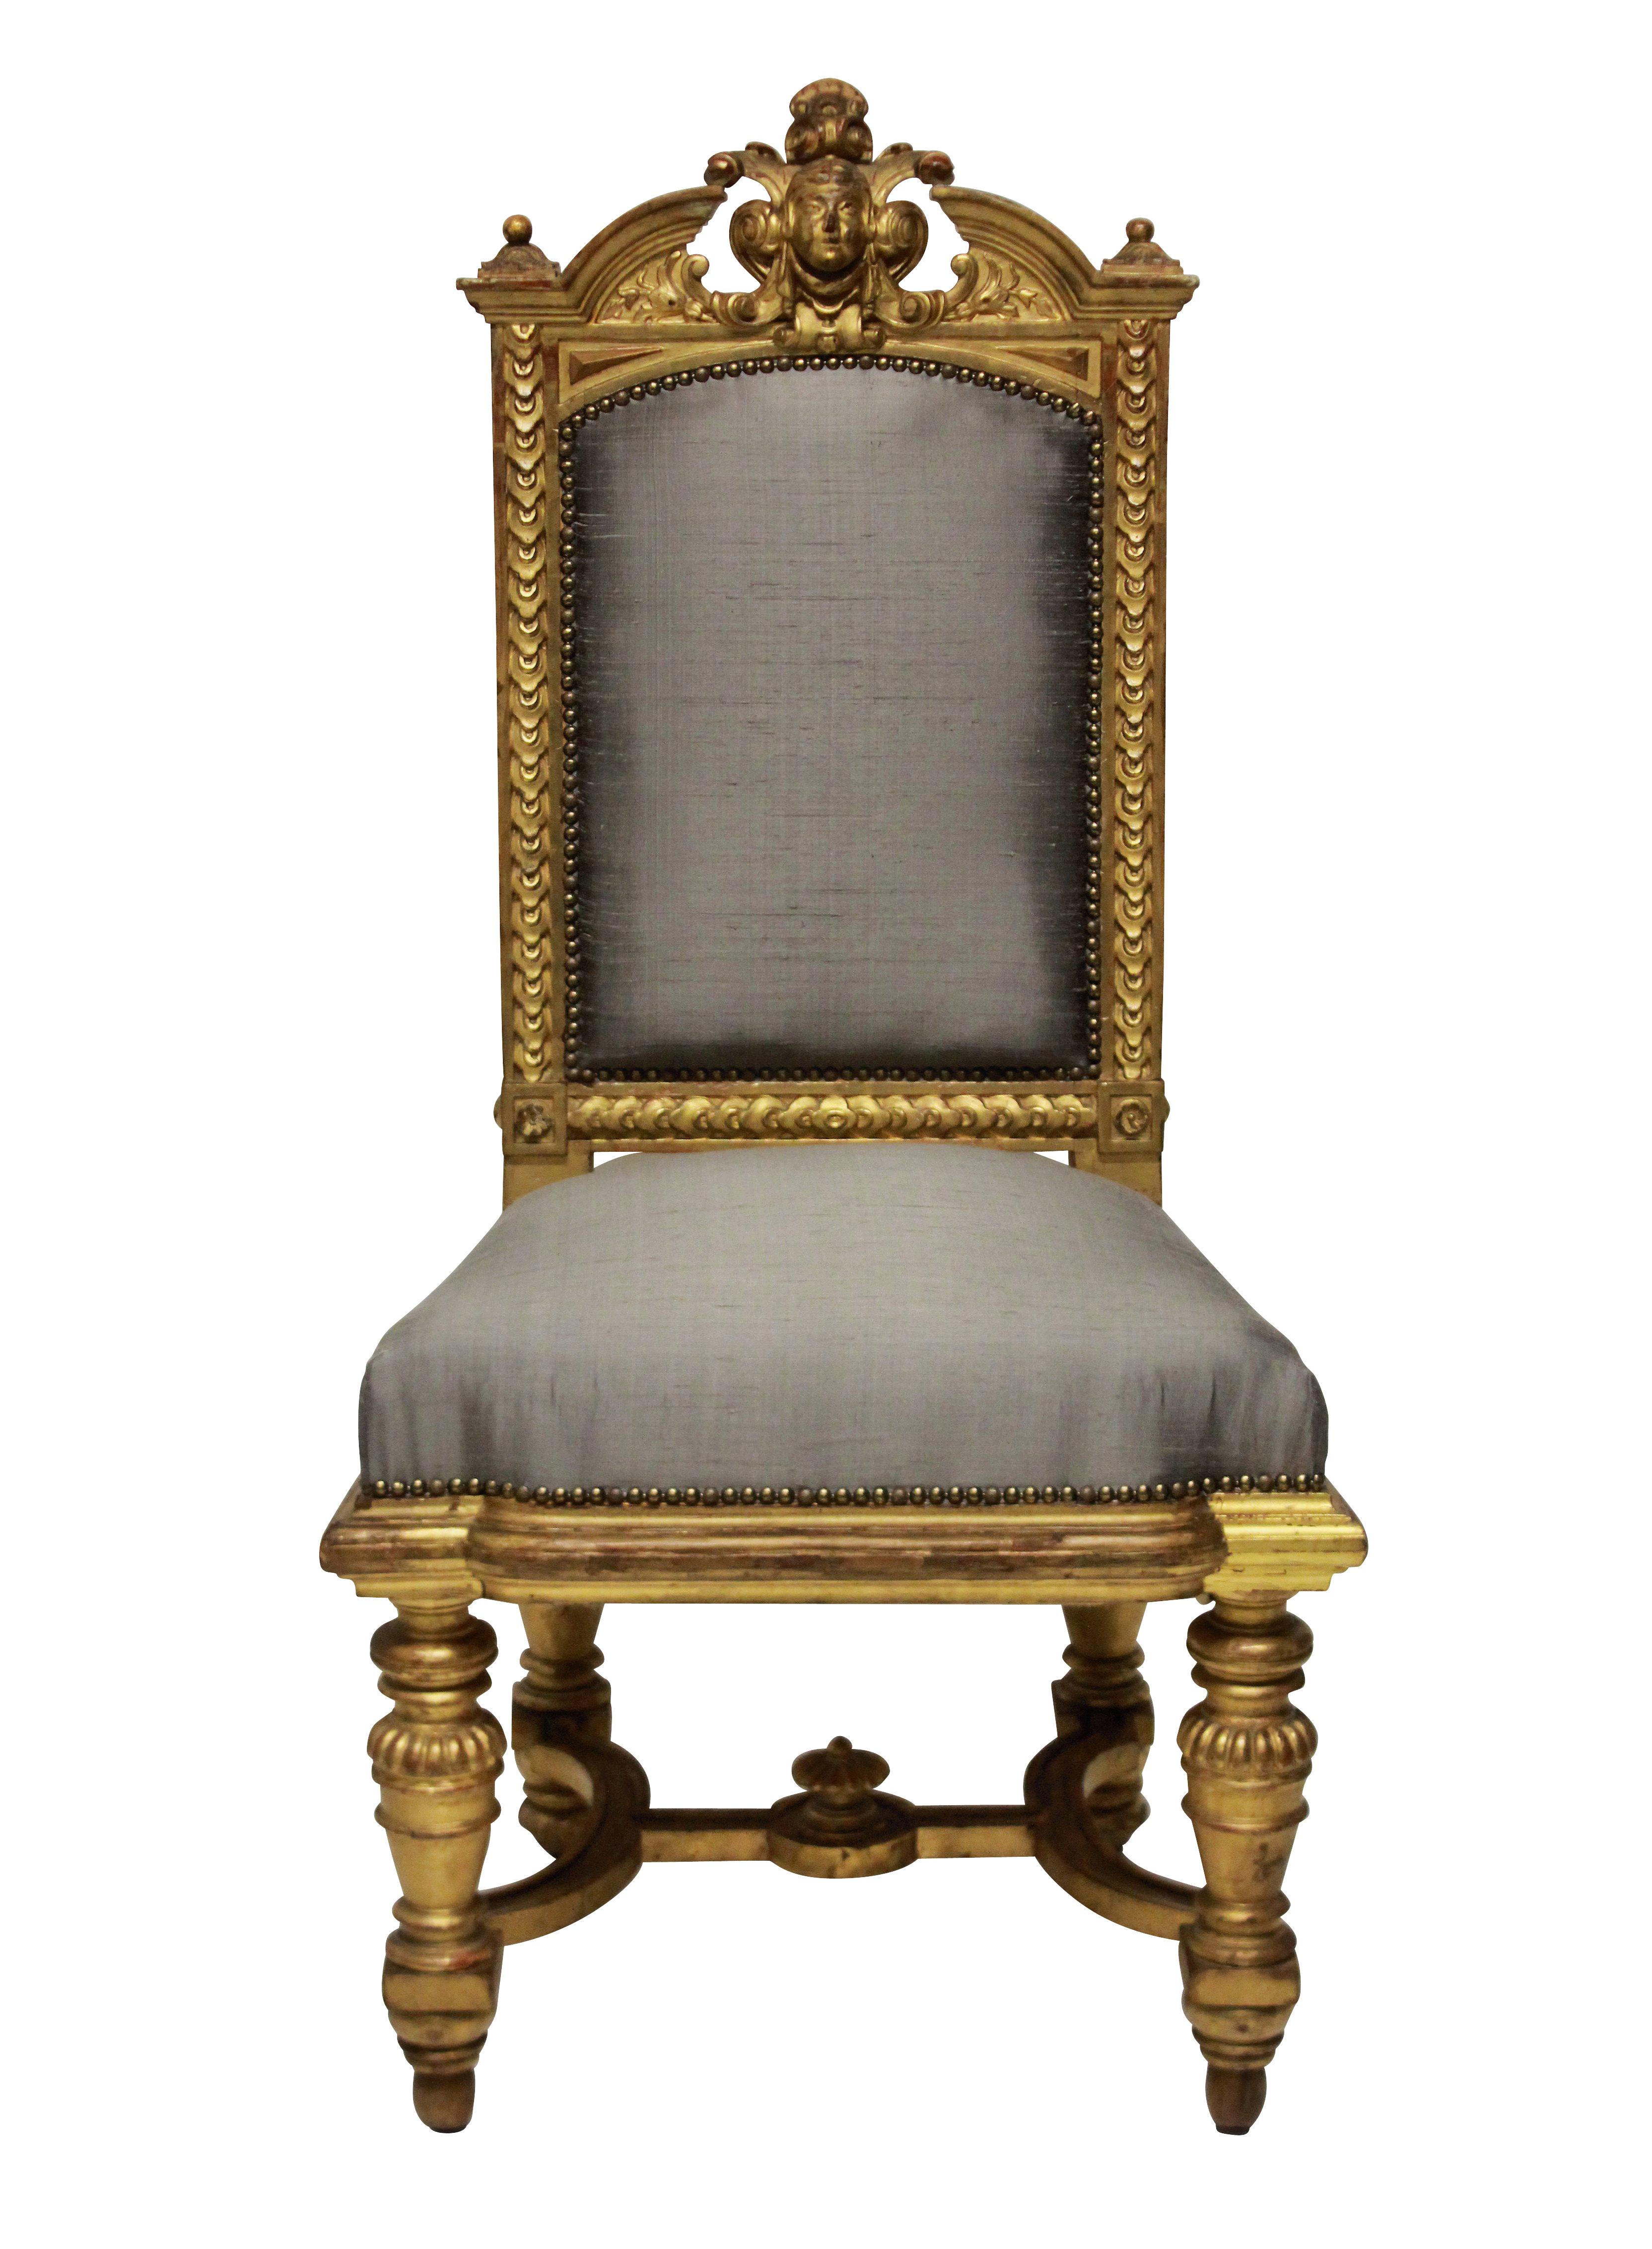 A pair of fine French Napoleon III water gilded chairs, beautifully carved and turned with central female classical masks and burnished throughout. Newly upholstered in stone colored silk.
 
 